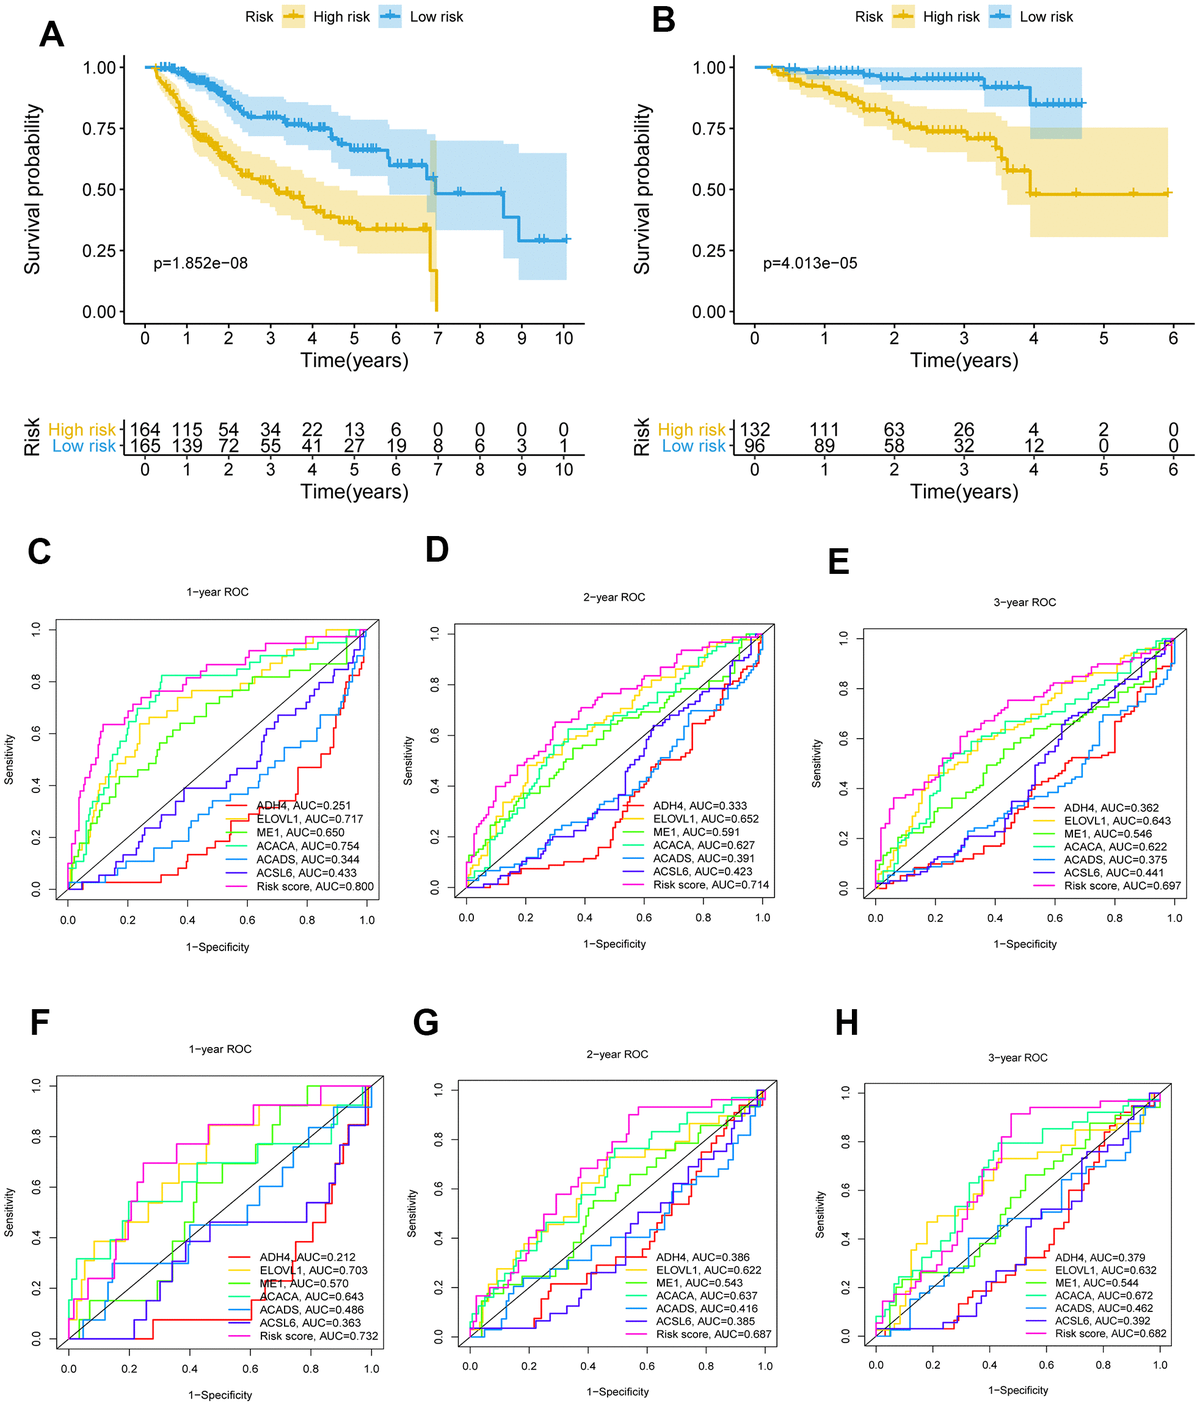 K-M survival analysis and ROC curves of risk prognostic model in HCC patients. (A, B) K-M survival analysis of risk prognostic model of HCC patients in TCGA and ICGC. (C–E) ROC curves analysis of risk prognostic model of HCC patients at 1 year, 2 years and 3 year in TCGA. (F–H) ROC curves analysis of risk prognostic model of HCC patients at 1 year, 2 years and 3 year in ICGC.